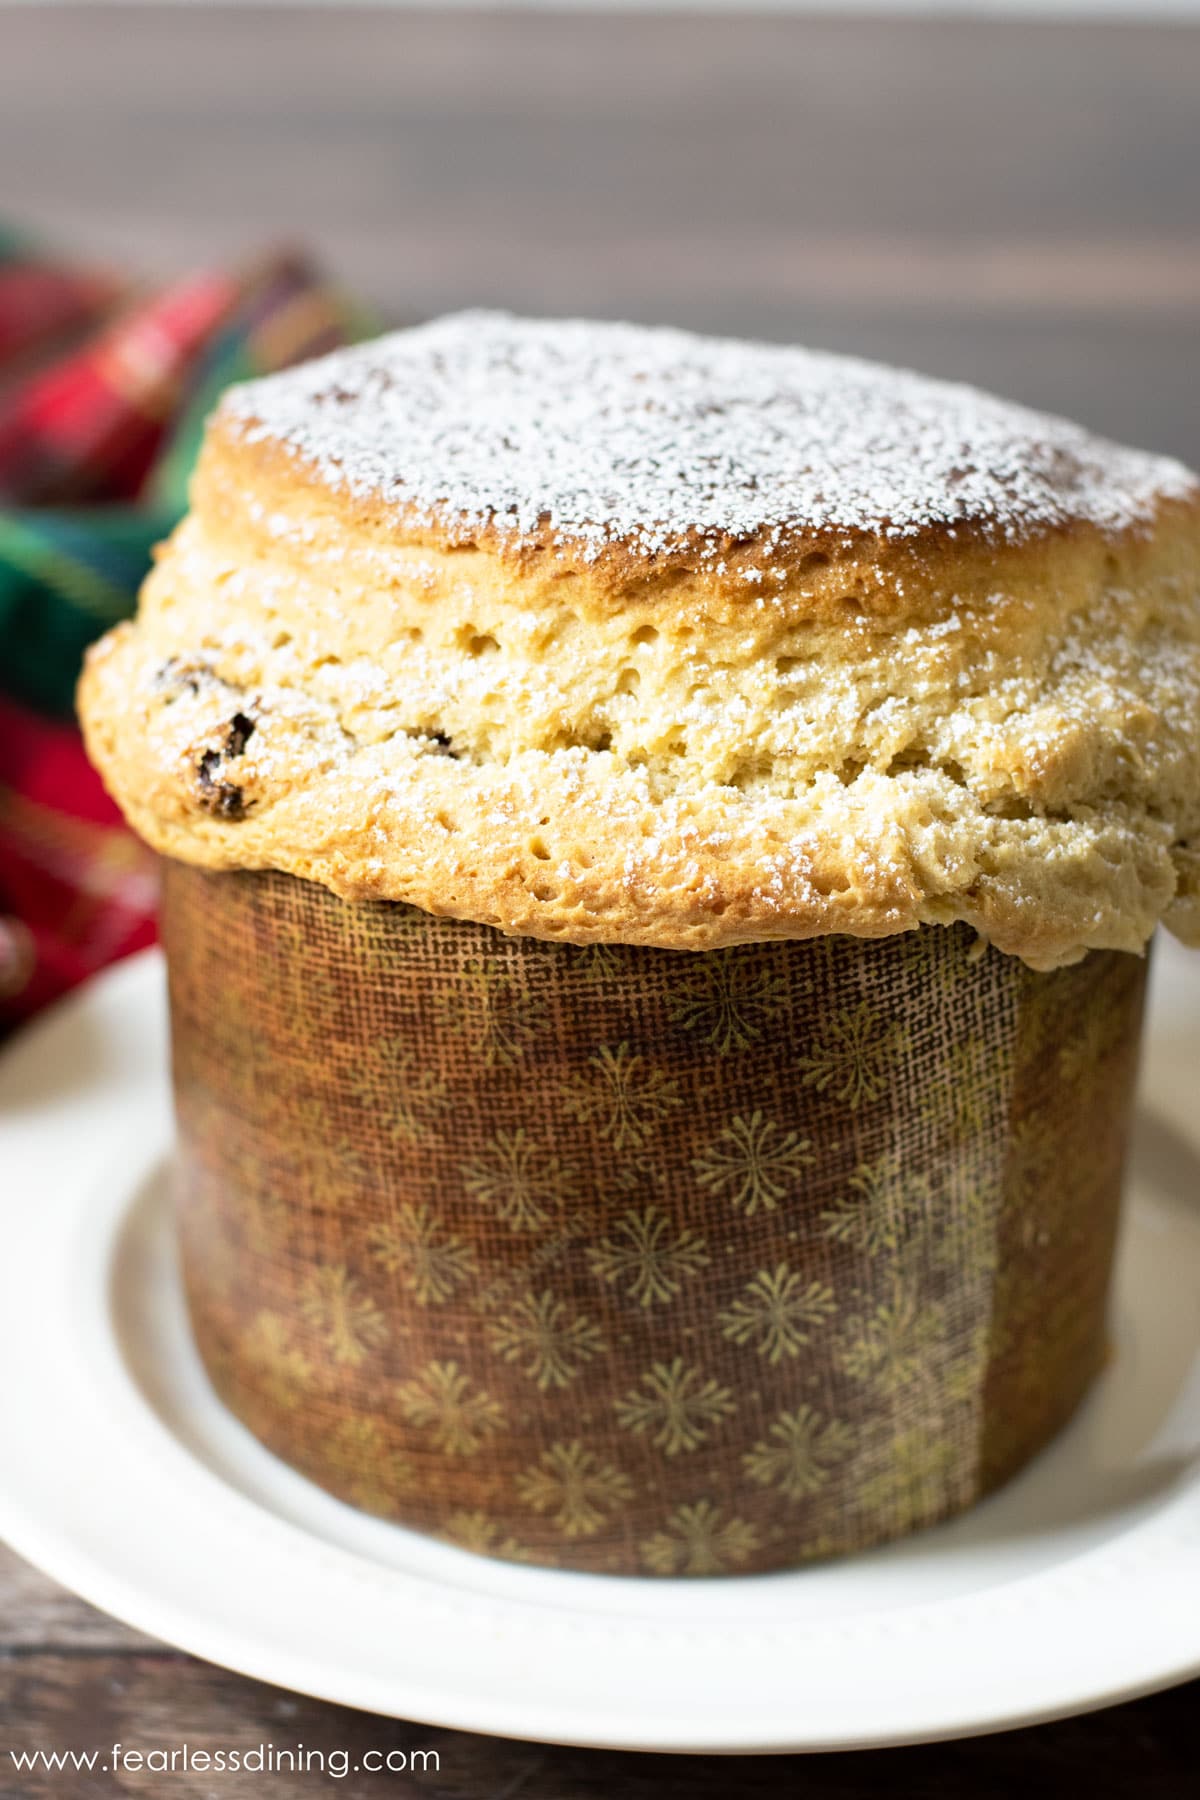 a baked gluten free panettone in a paper mold